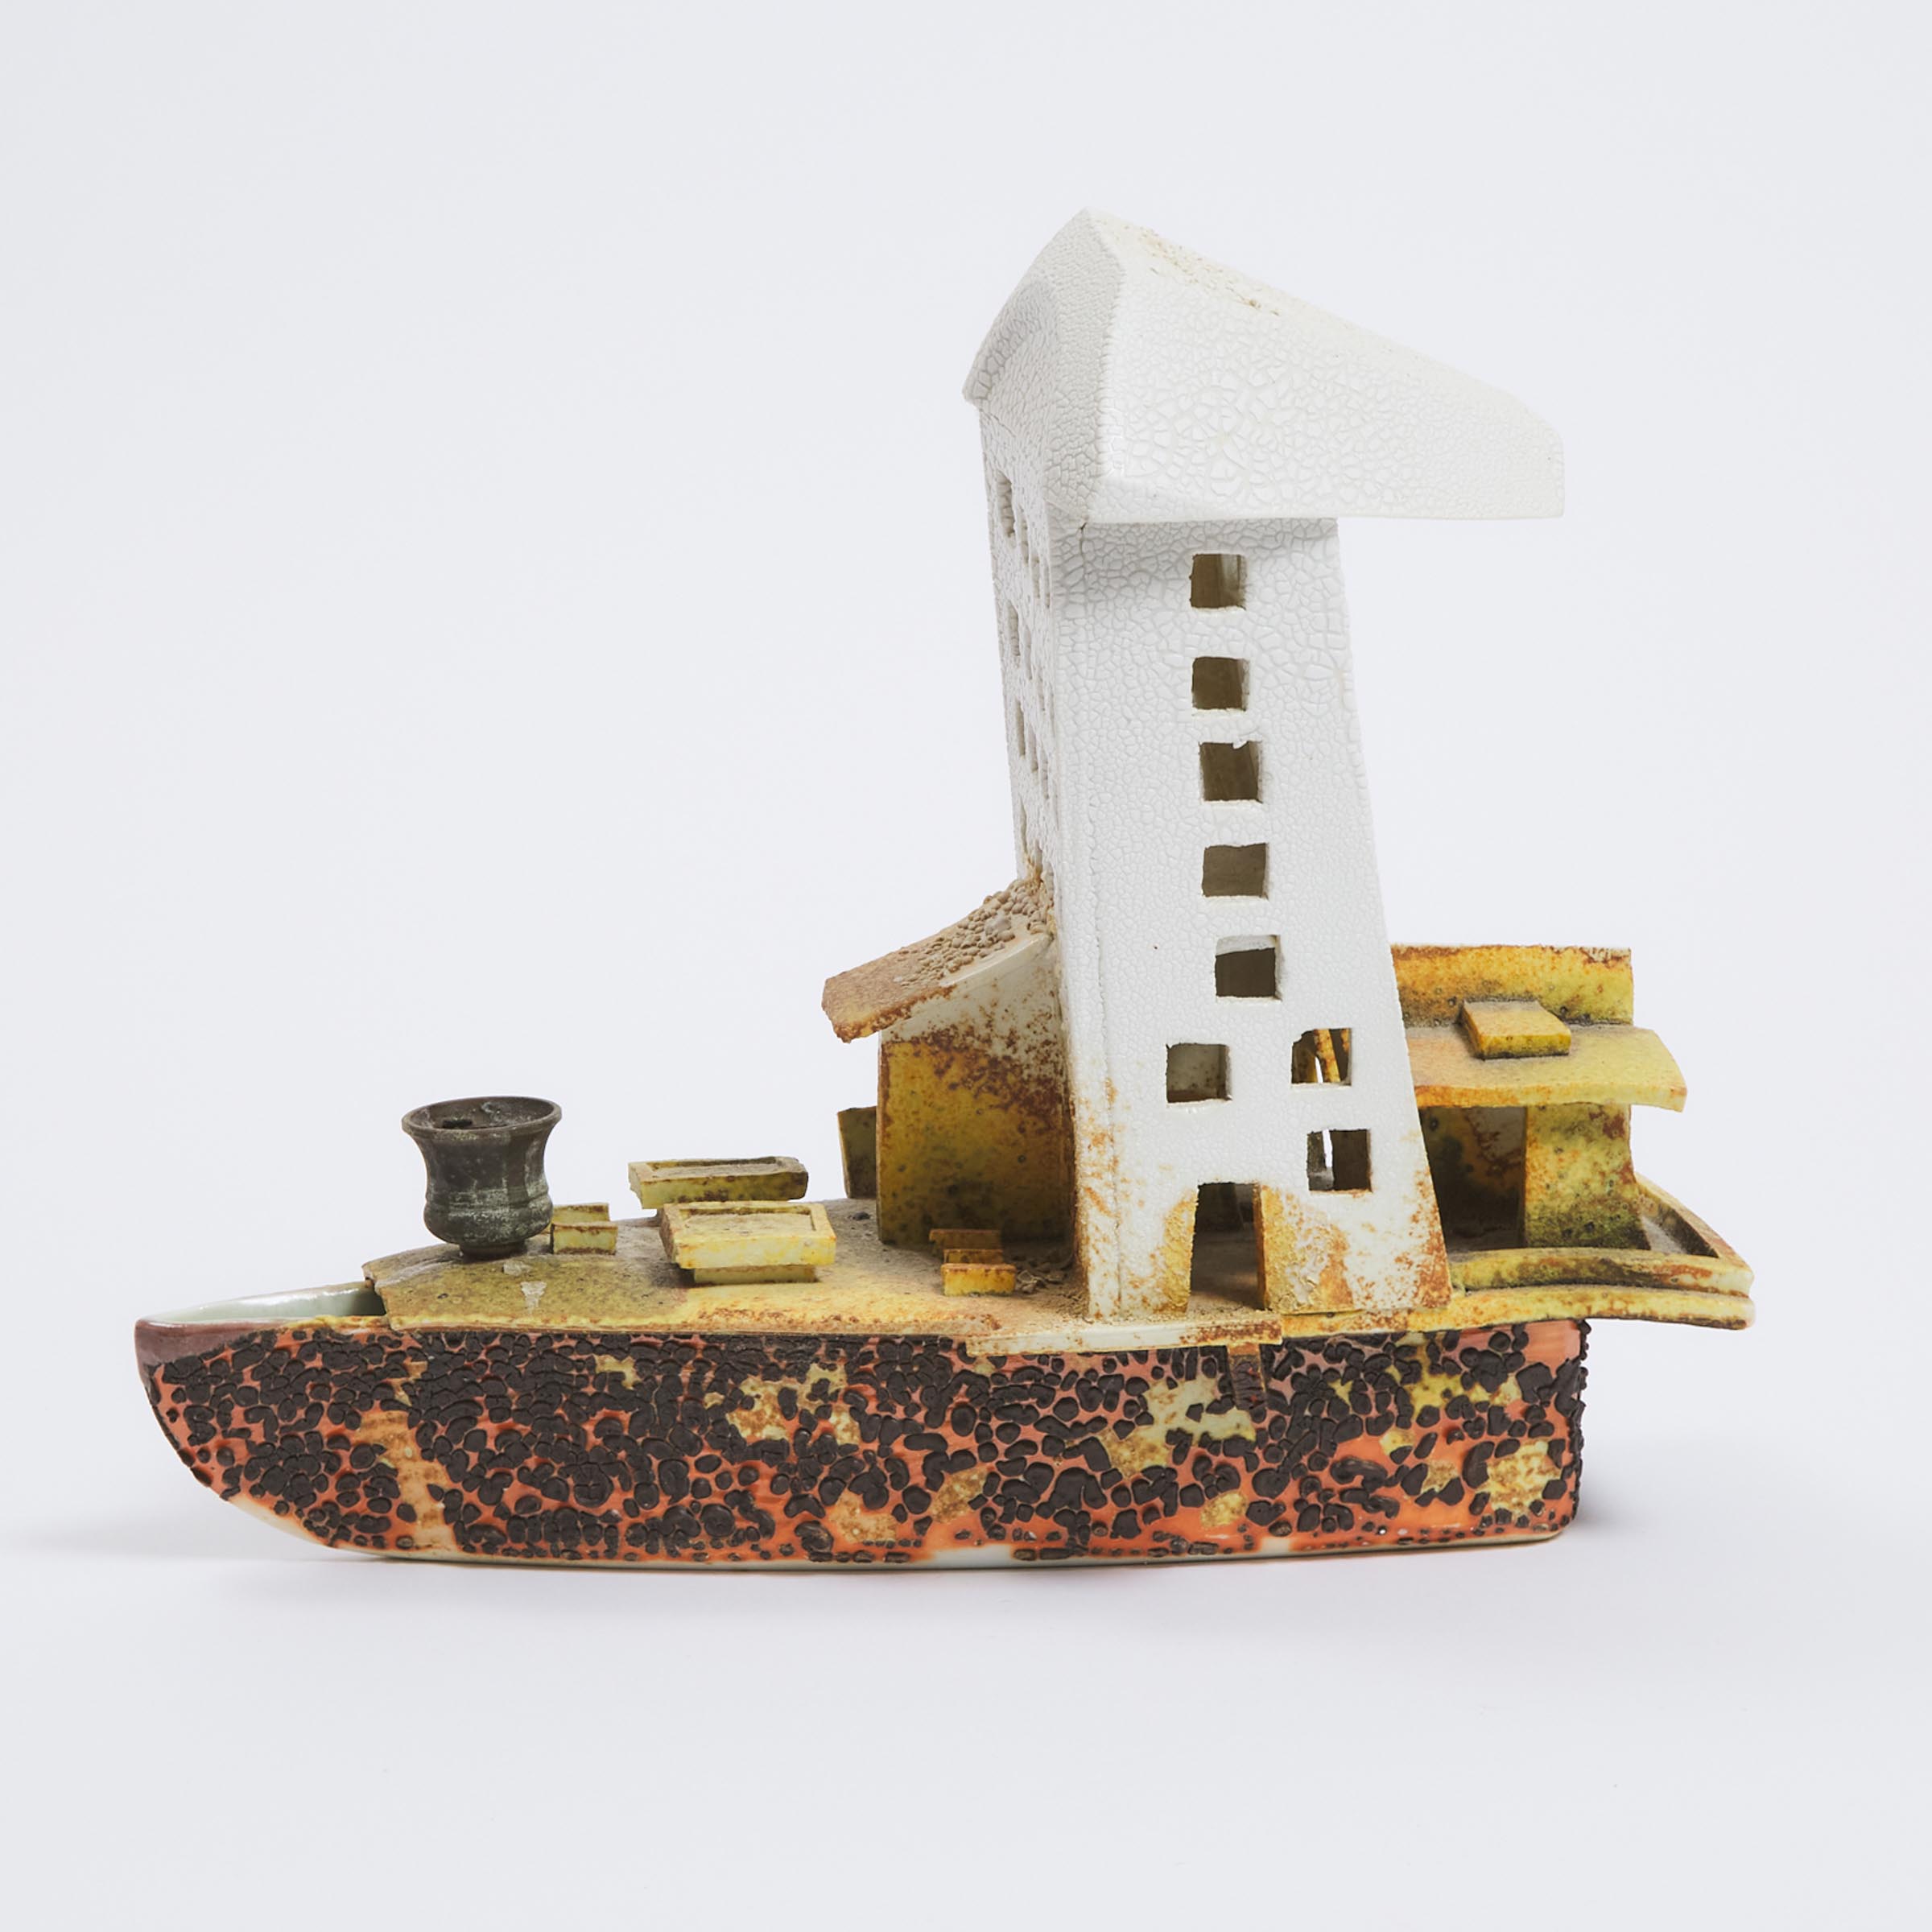 Harlan House (Canadian, b.1943), 'Room – You Bet' Boat Sculpture, 2006